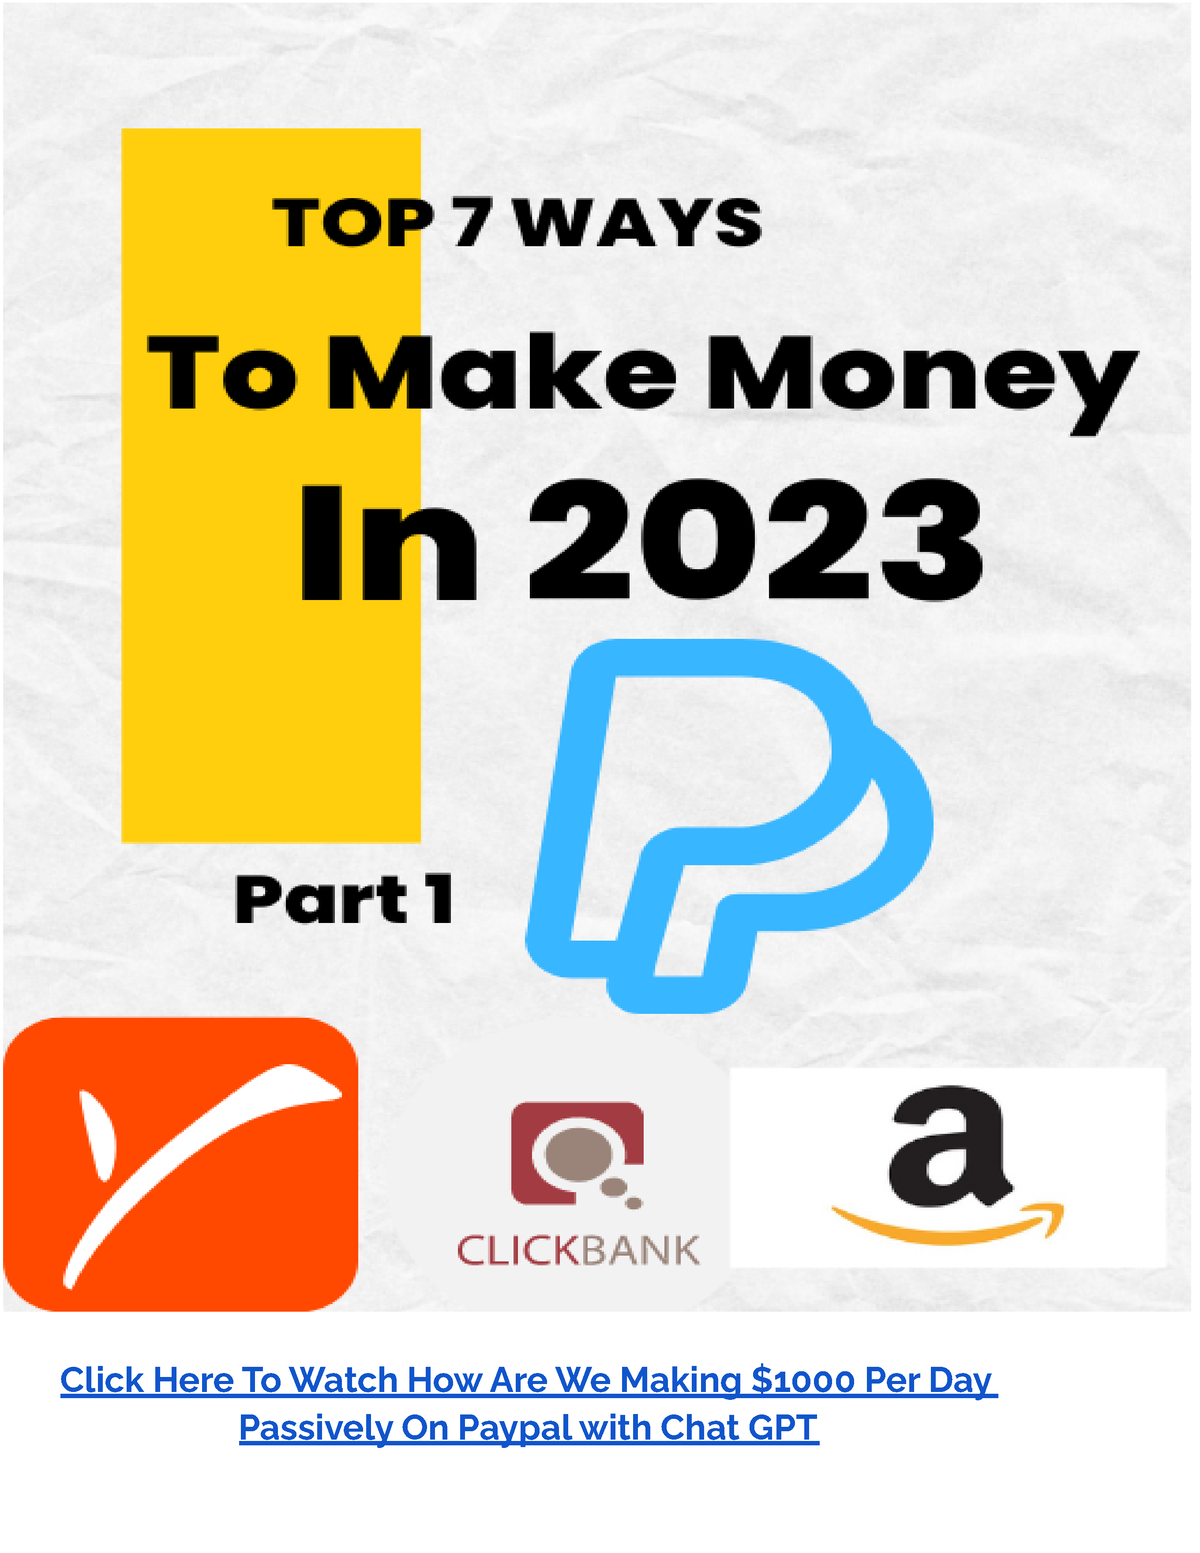 How to Make Money With Streaming: 7 Ideas 2023